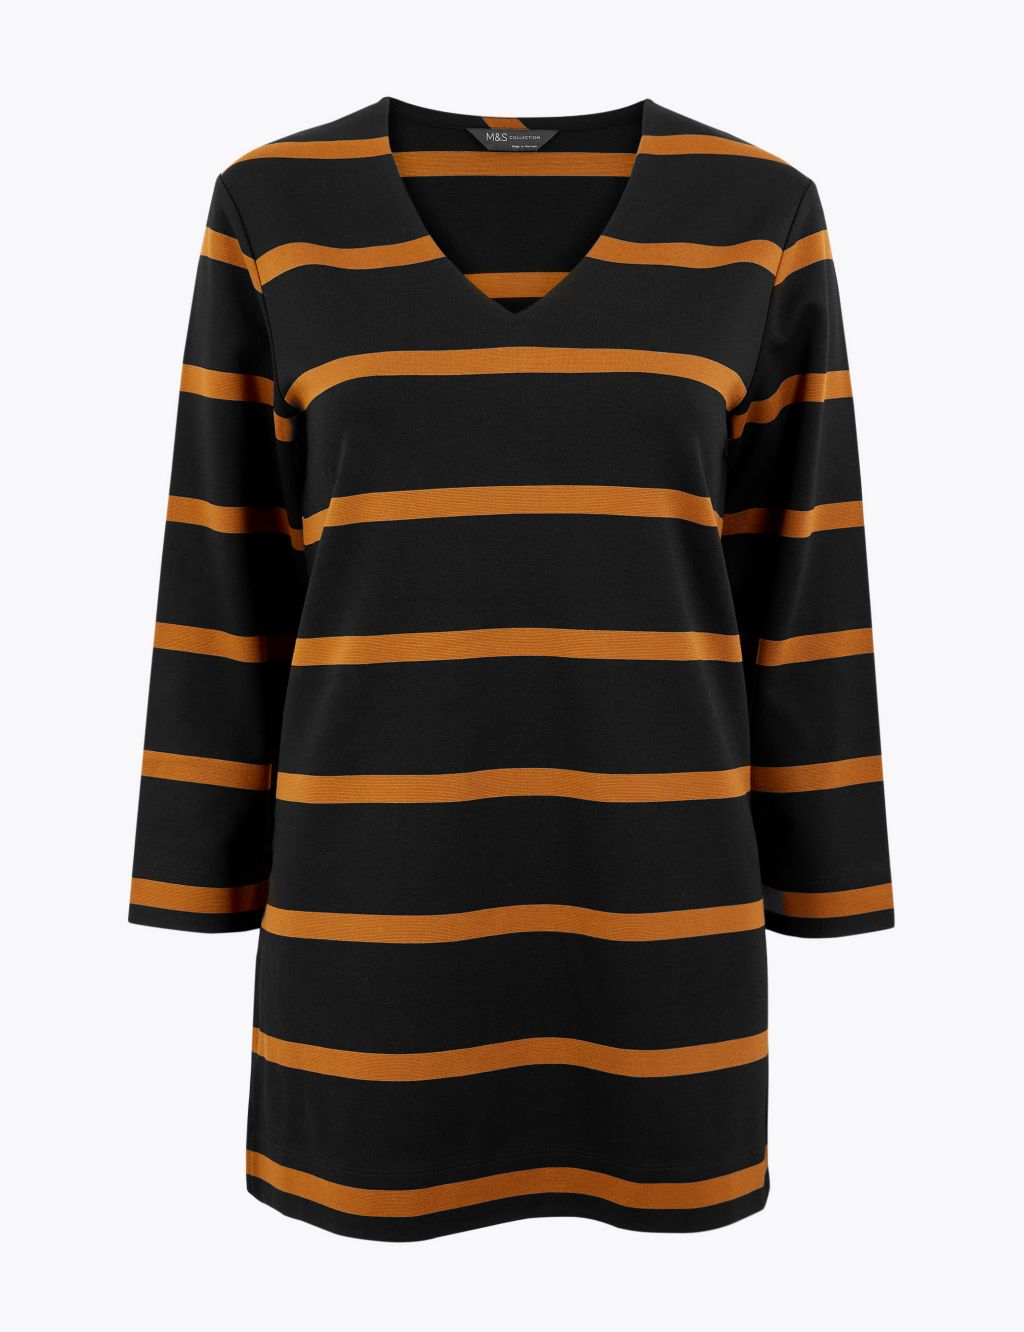 Striped 3/4 Sleeve Tunic | M&S Collection | M&S